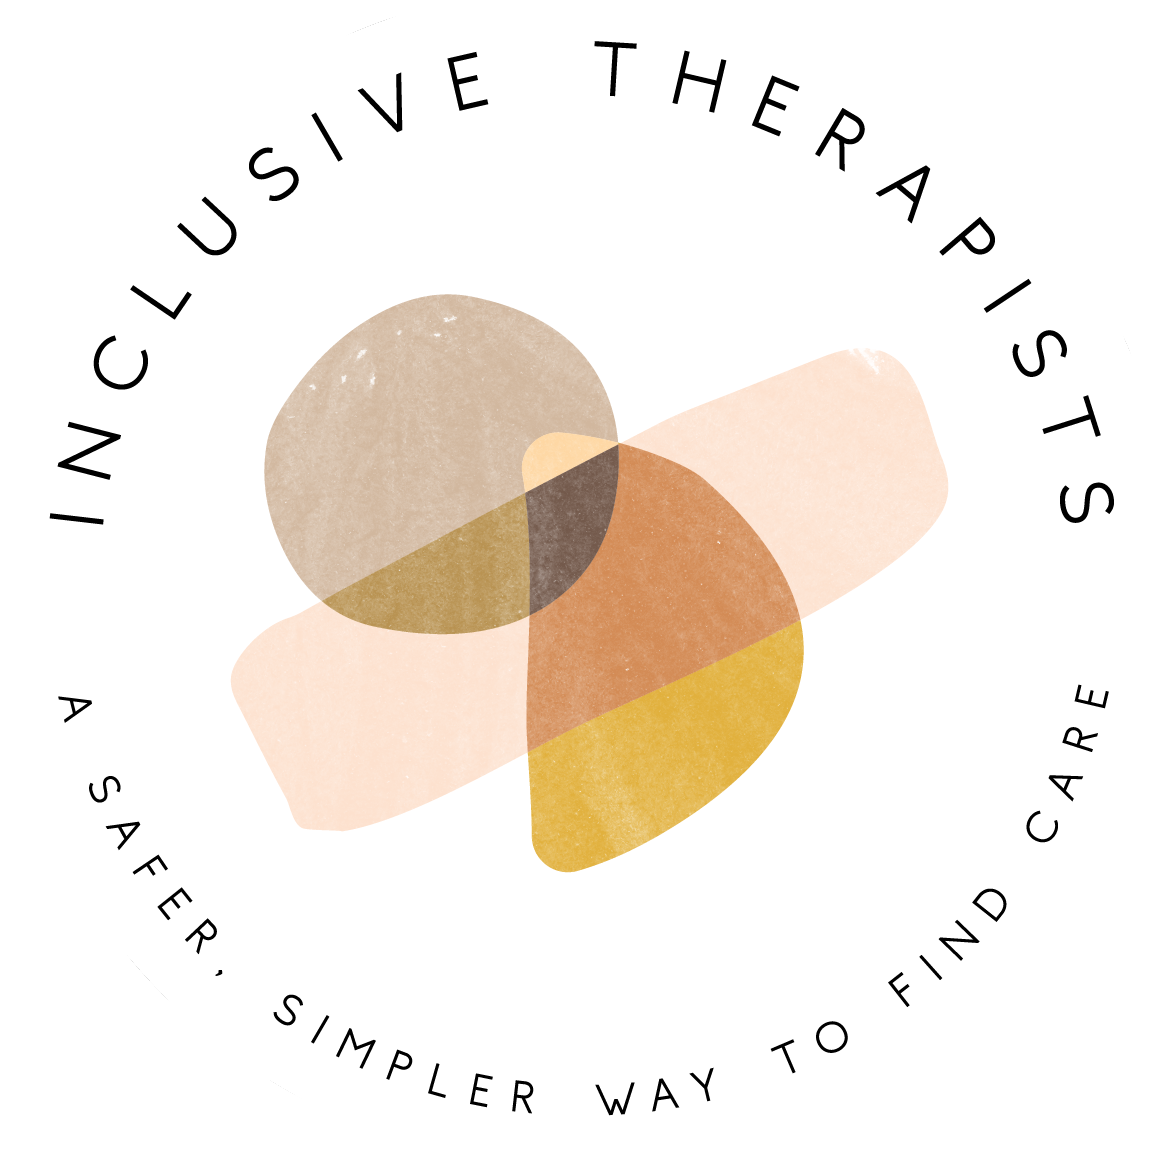 Therapist Directory, Support, Resources